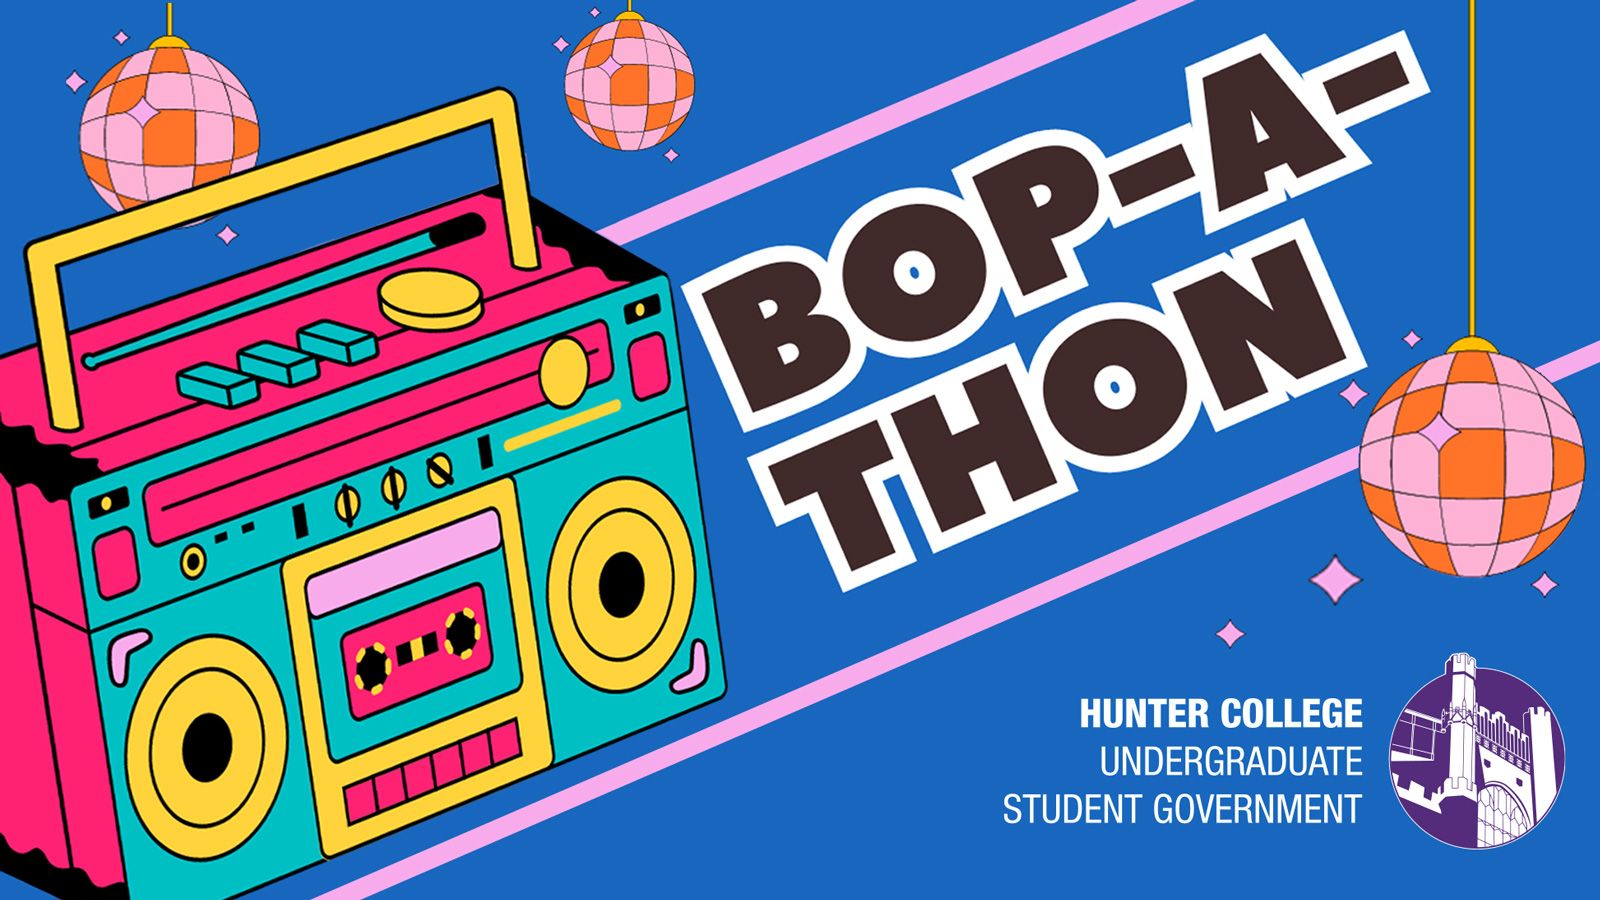 Illustration: retro boombox next to the event title, “BOP-a-Thon”